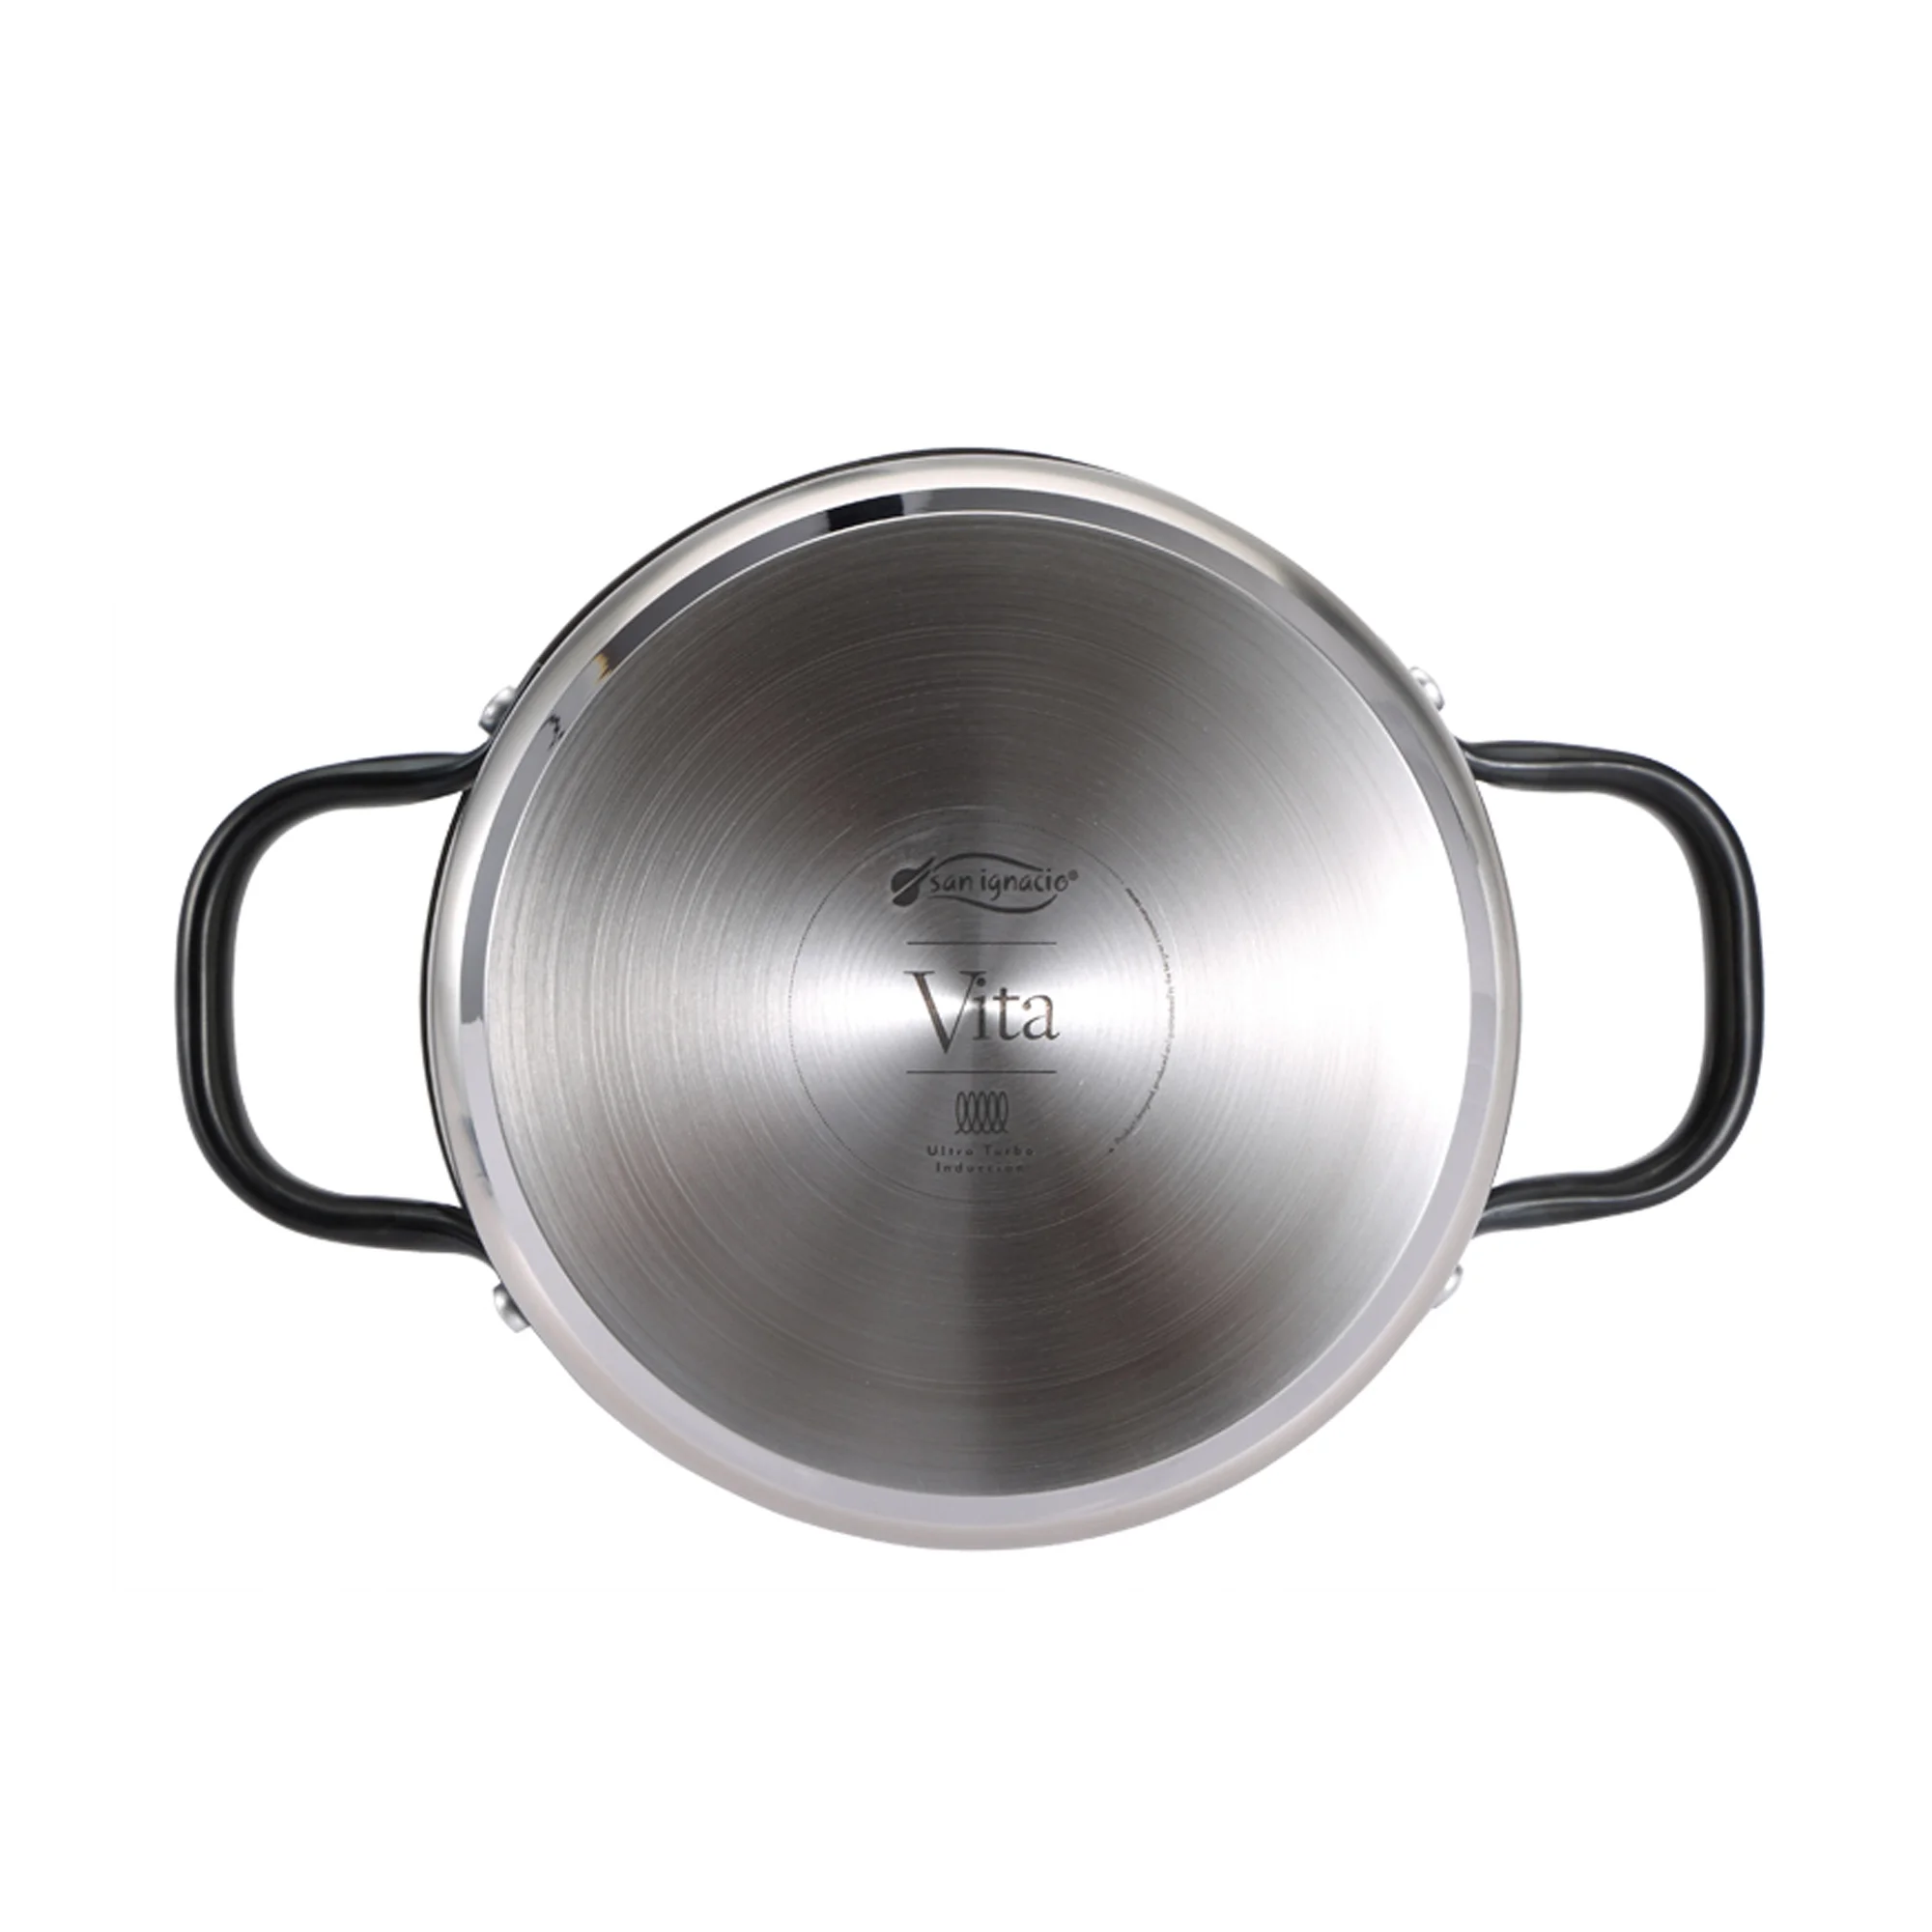 https://ae01.alicdn.com/kf/U0302d657c62e43858a8058486be49146Q/BERGNER-pans-20-24-cm-in-stainless-steel-and-20-28-cm-pans-in-forged-aluminium.jpg